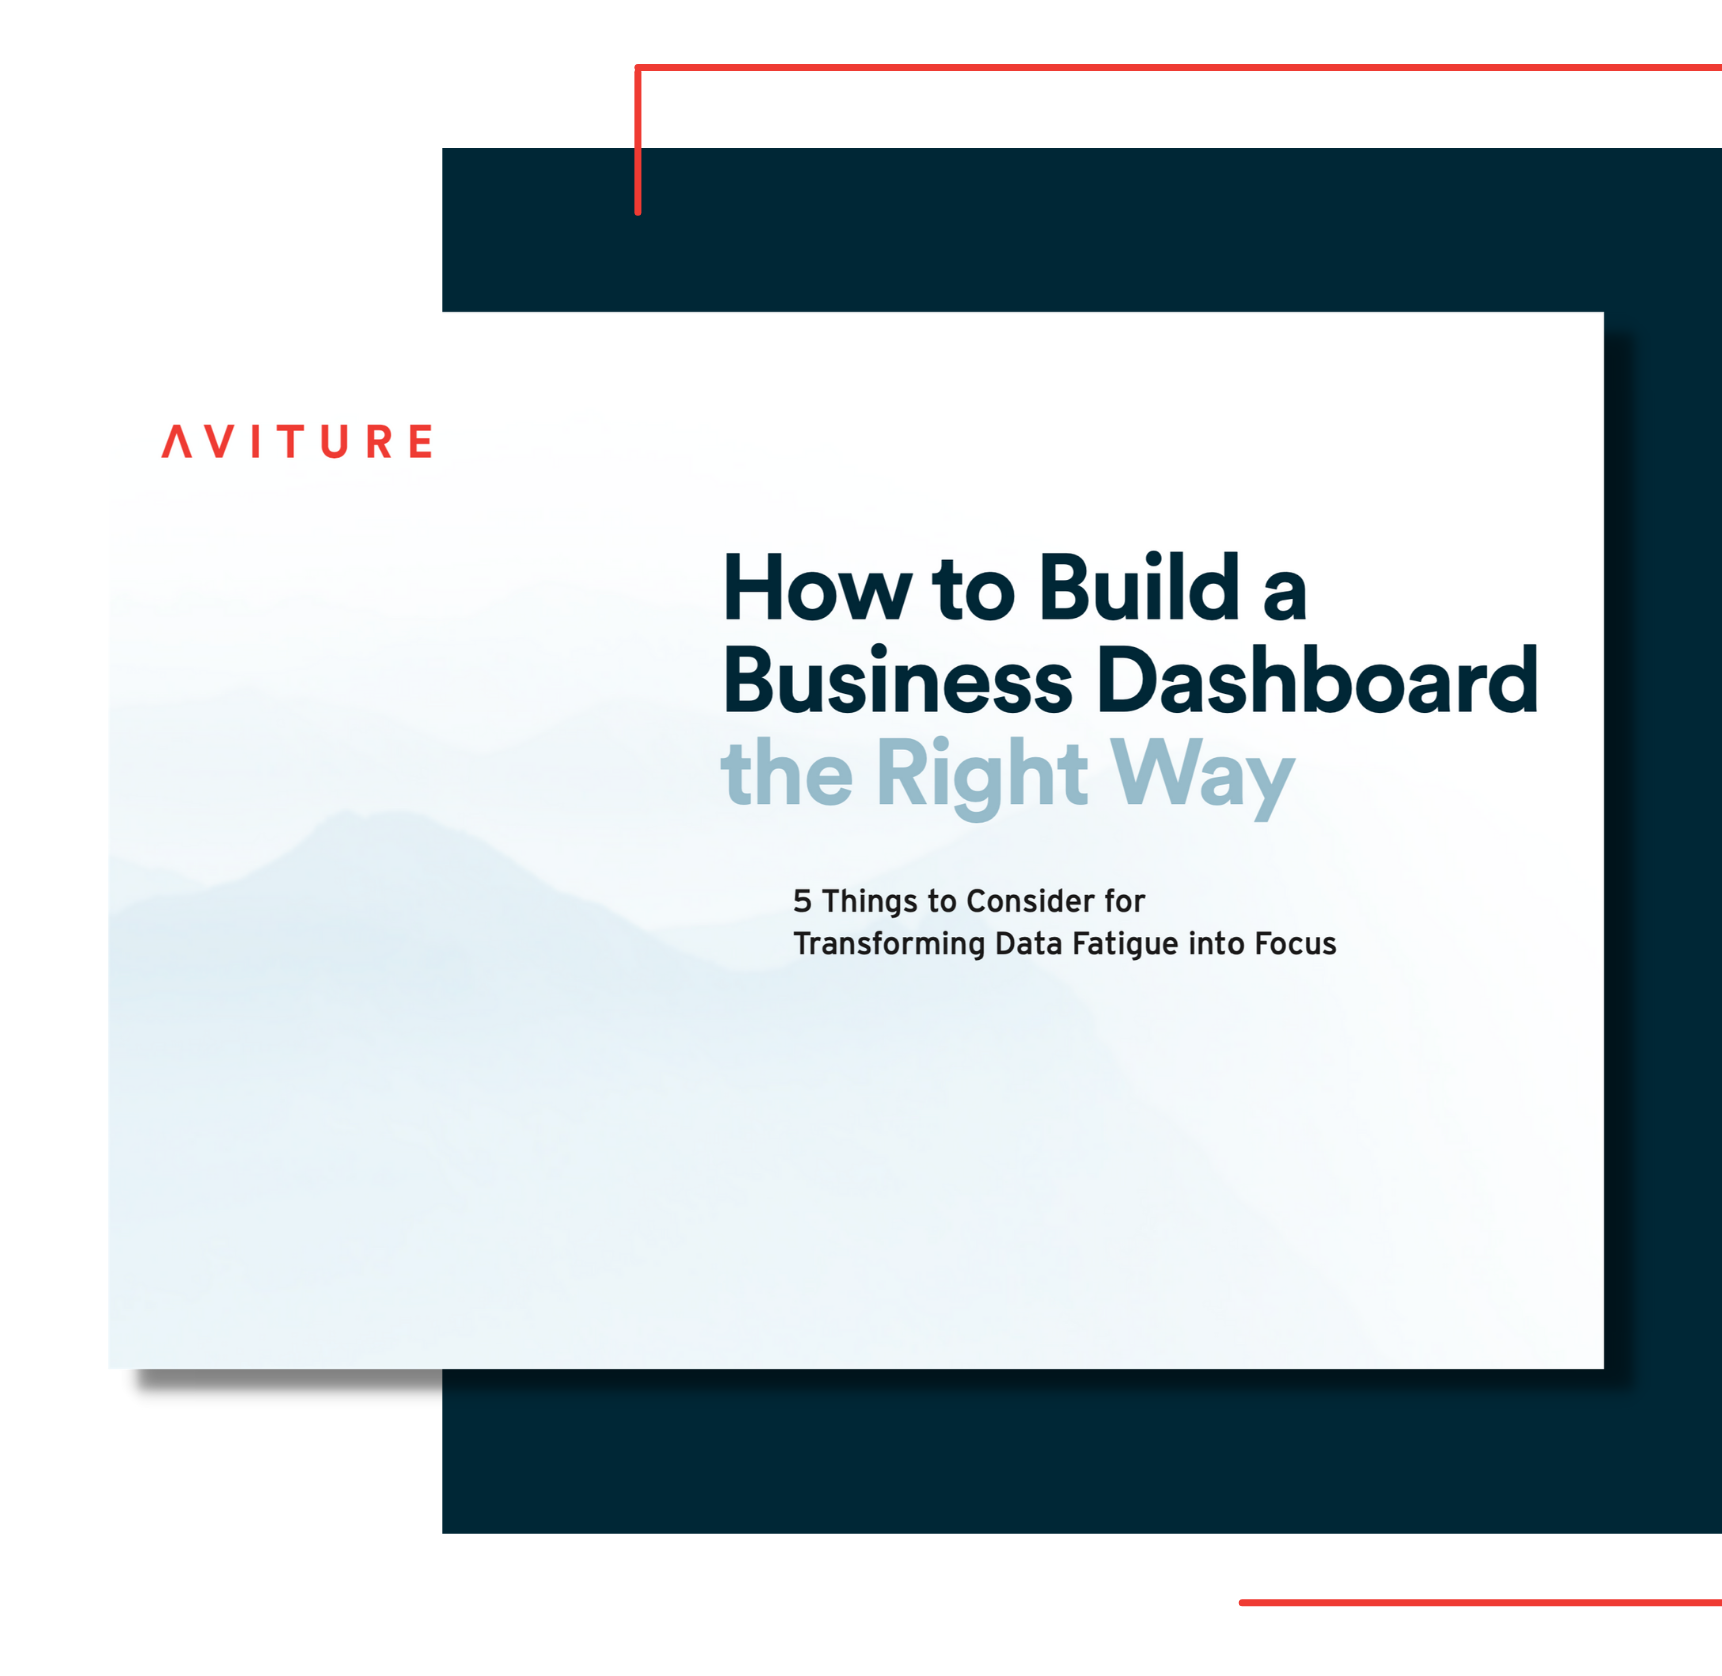 How to Build a Business Dashboard the Right Way